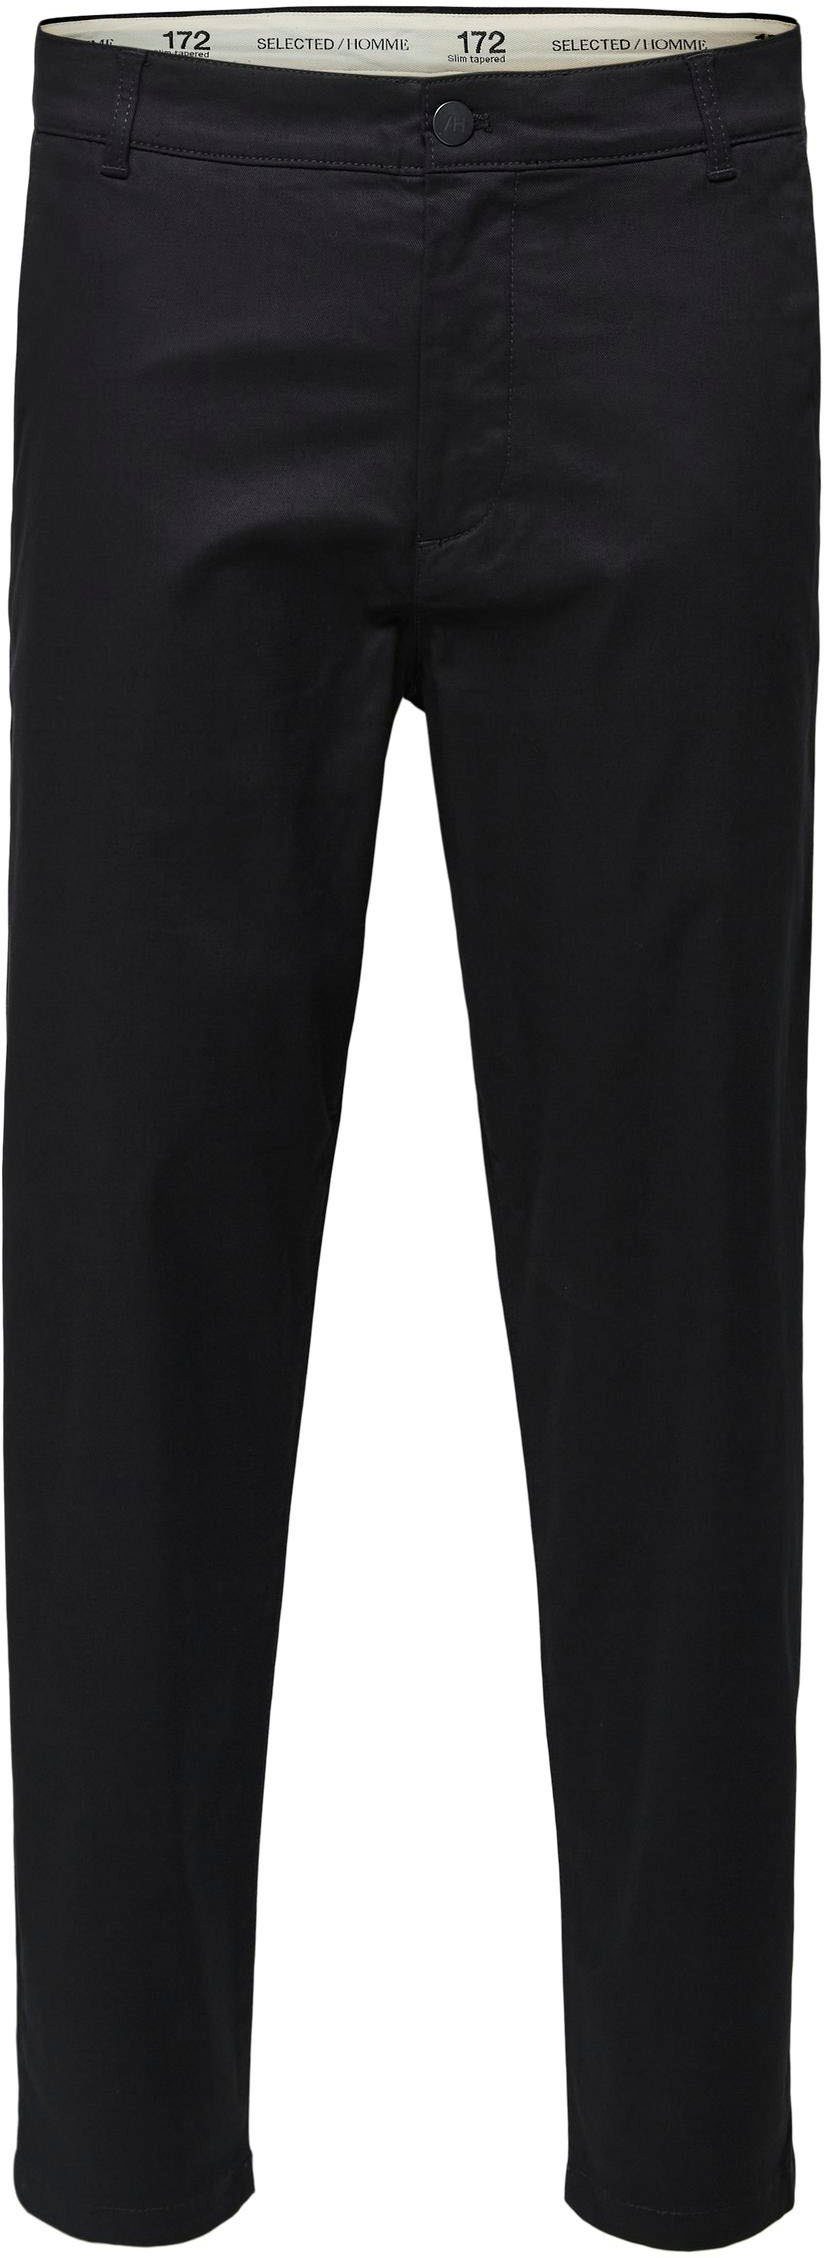 Black PANTS HOMME Chinohose FLEX REPTON SELECTED